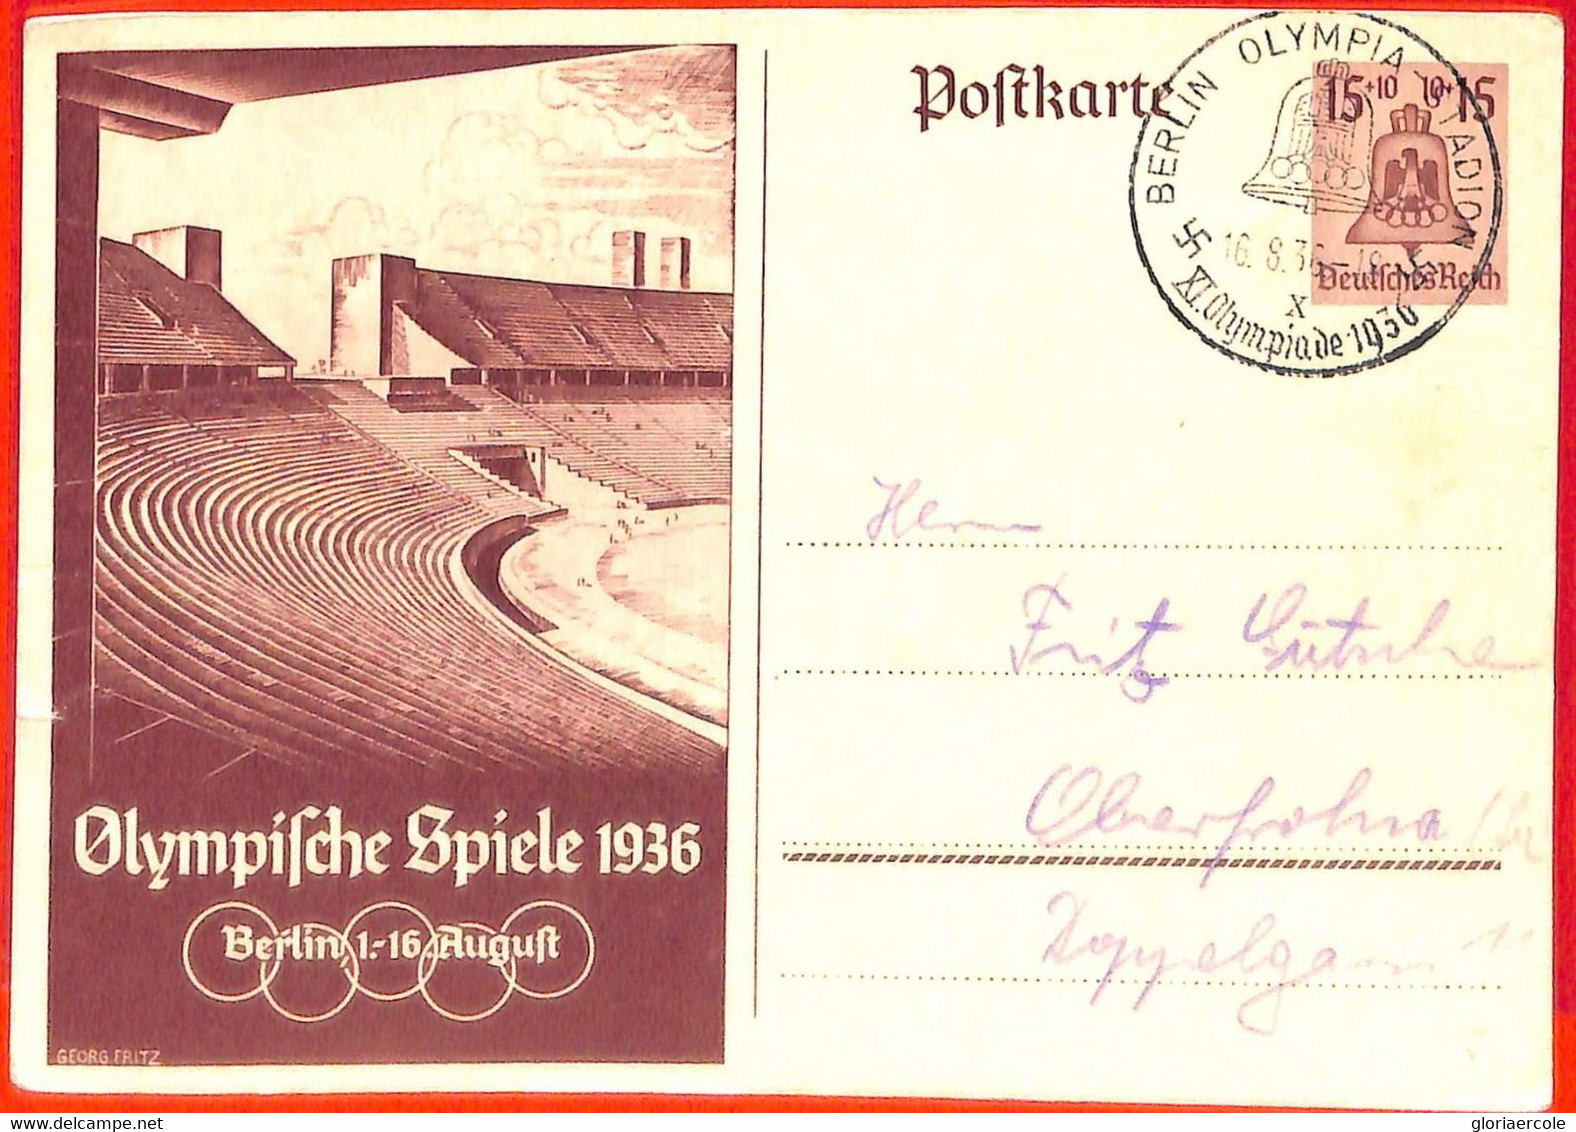 Aa2573 - Germany - POSTAL HISTORY - 1936 Olympic Games SPECIAL POSTMARK Football - Sommer 1936: Berlin